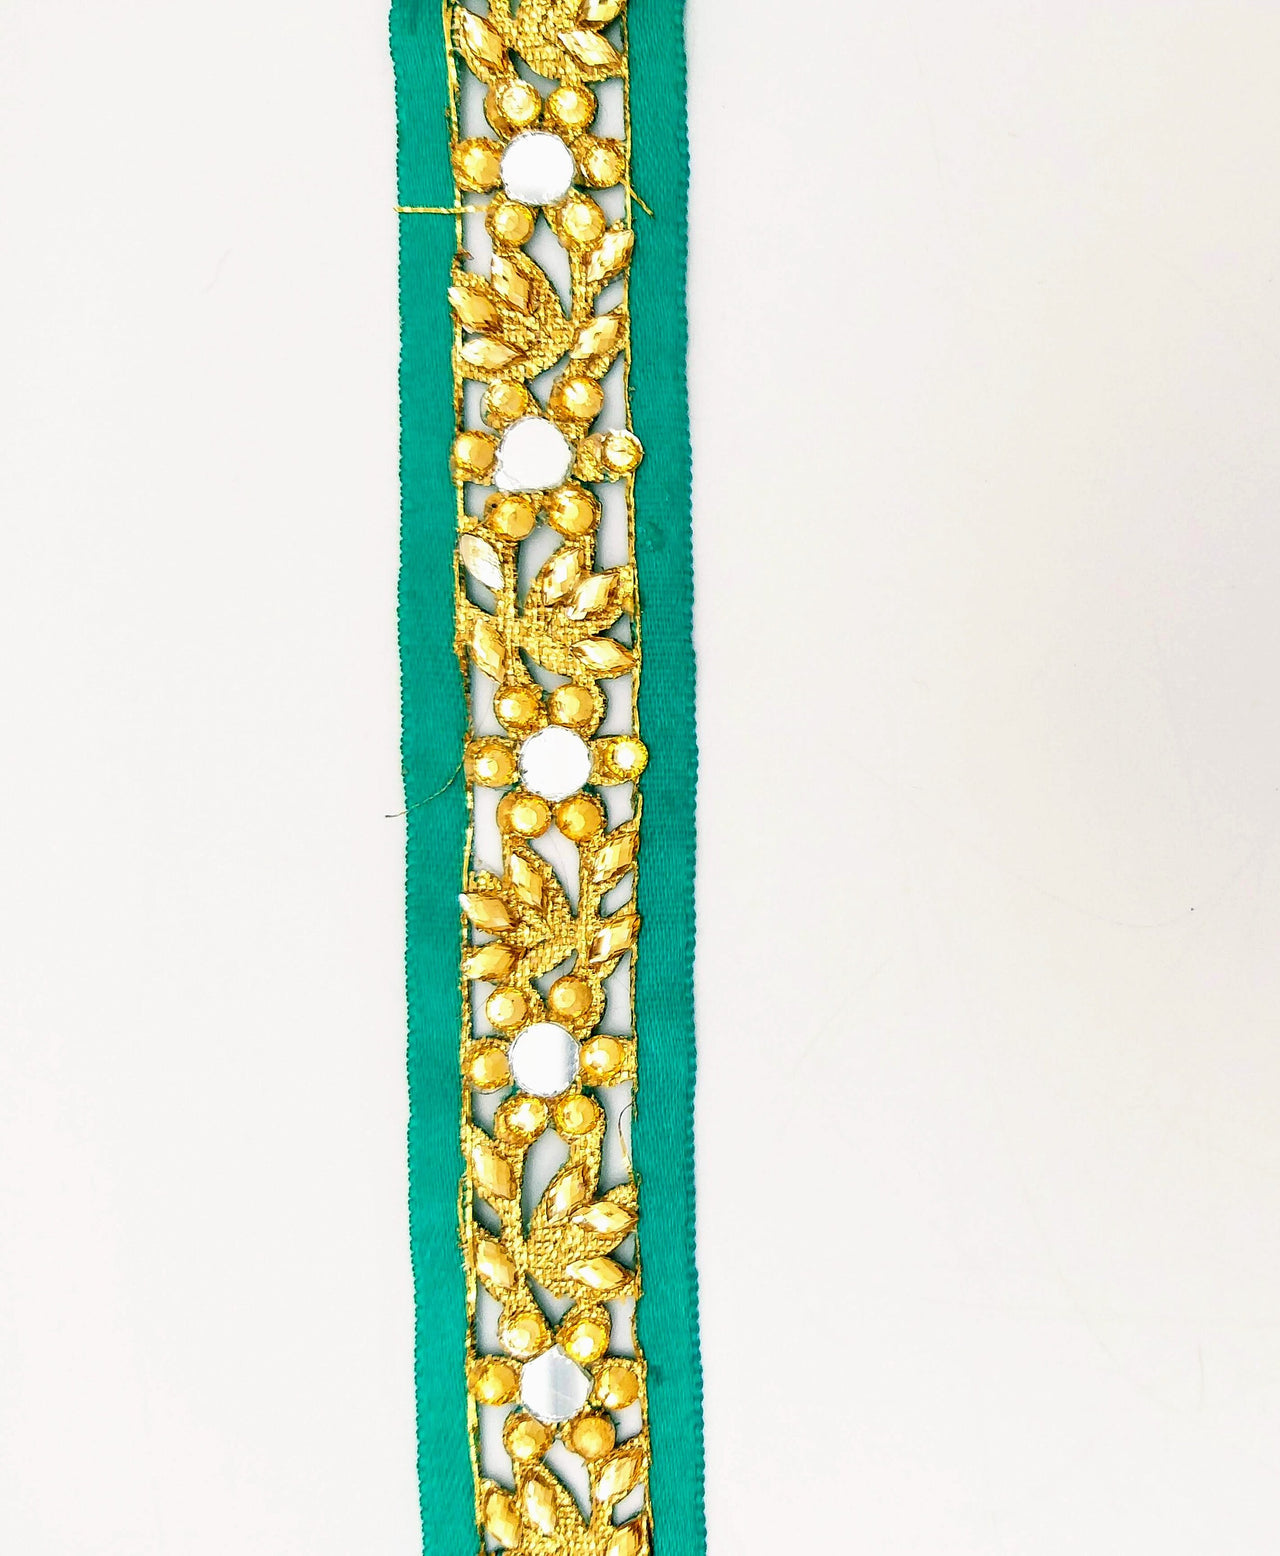 Dark Green Satin Ribbon Floral Cutwork Lace Trim Embellished with Real Mirrors and Kundan Beads, Decorative Trim, Trim By 3 Yards